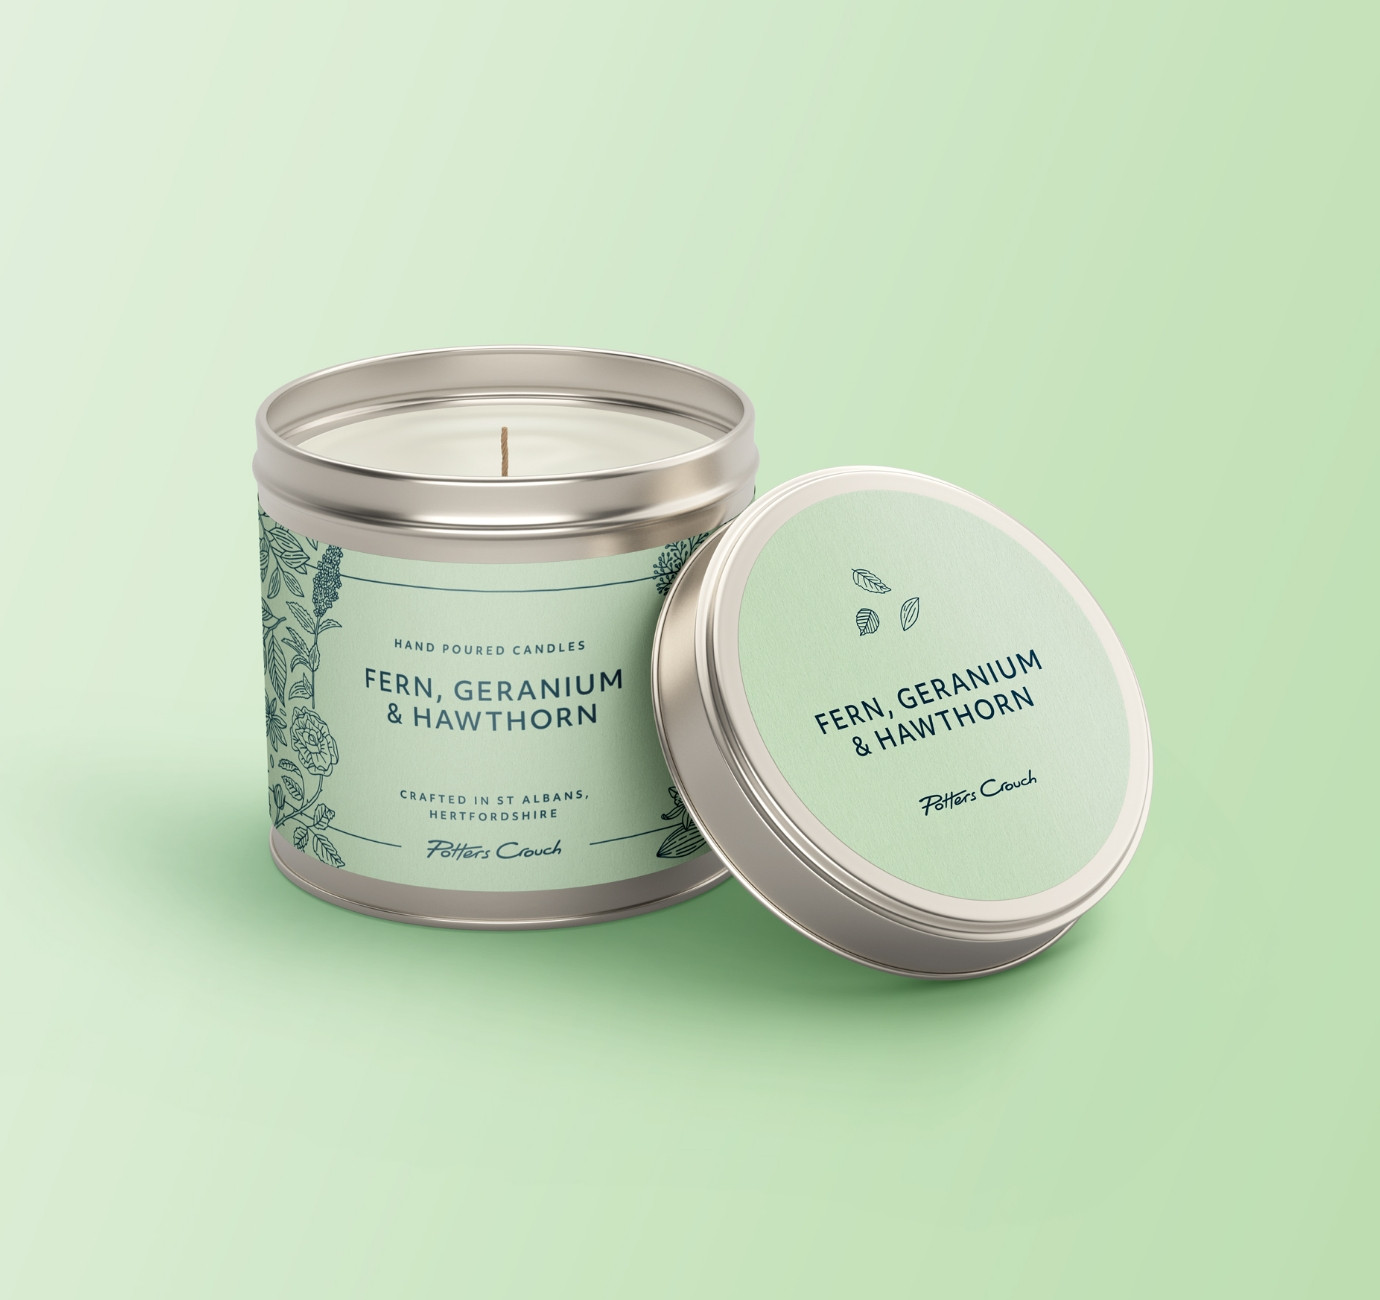 Potters Crouch Candle Tin Label Design by Root Studio